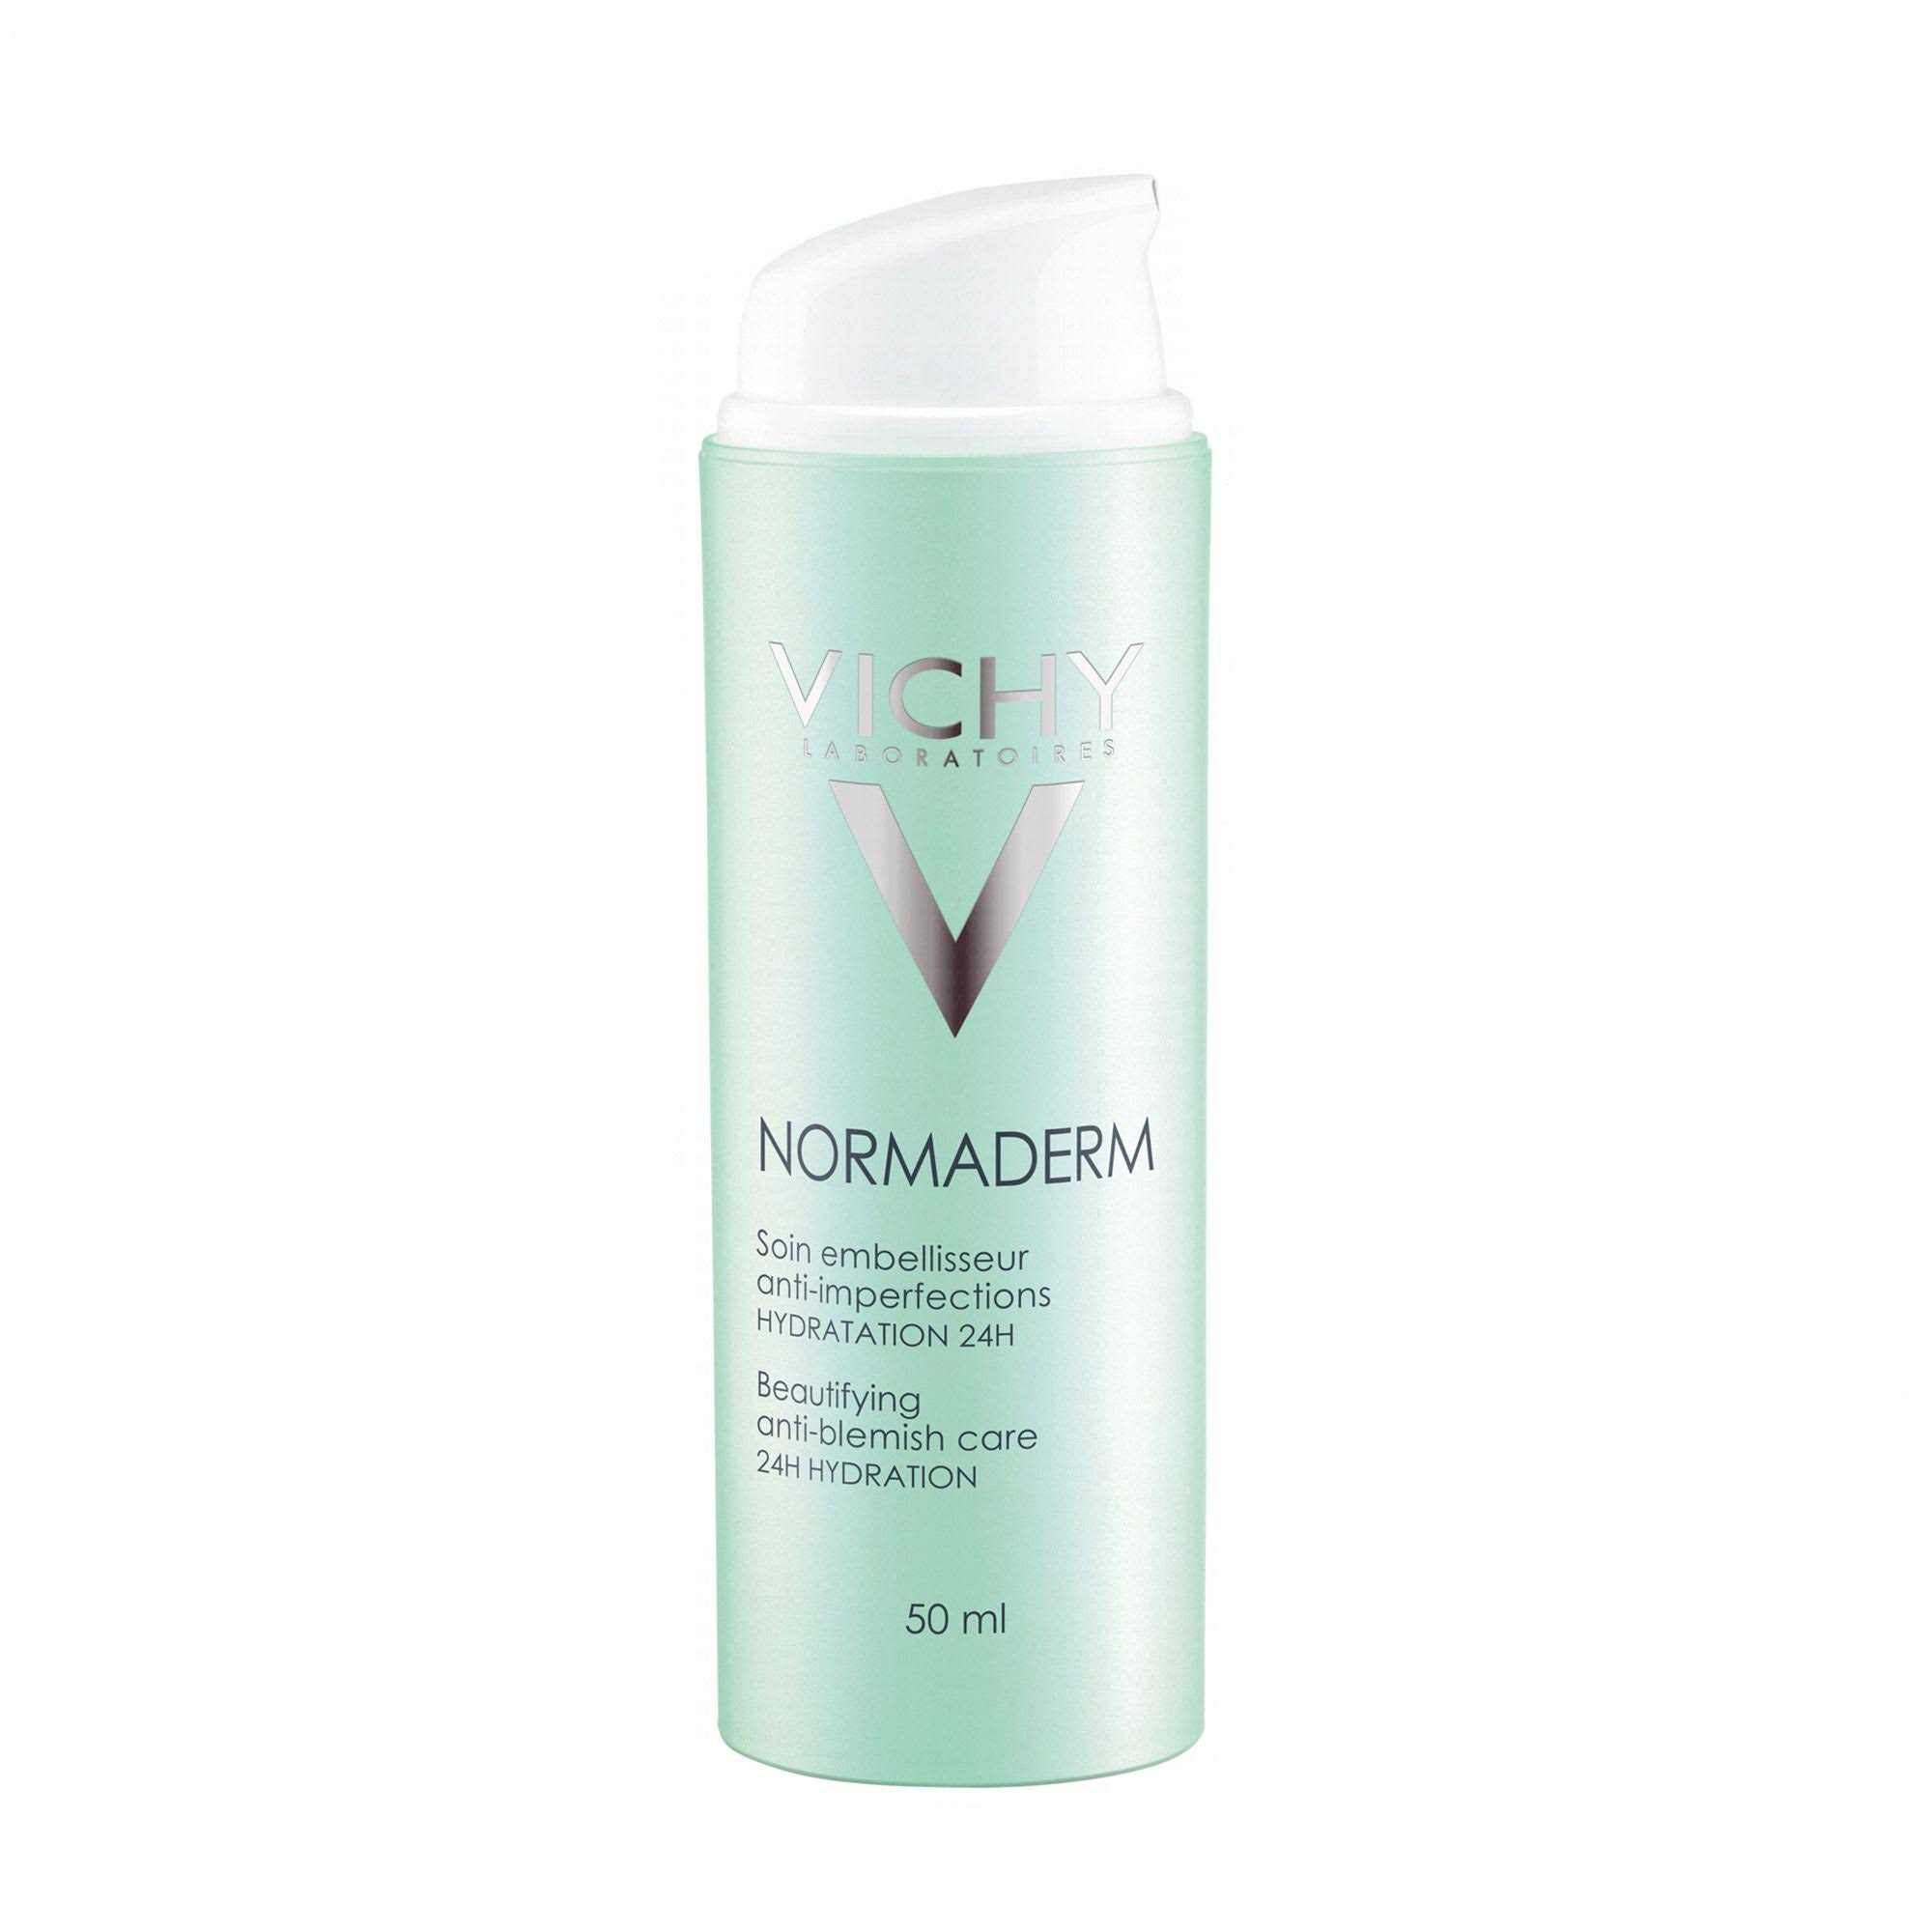 Vichy Laboratoires Normaderm Beautifying Anti Blemish Care - 1.69oz